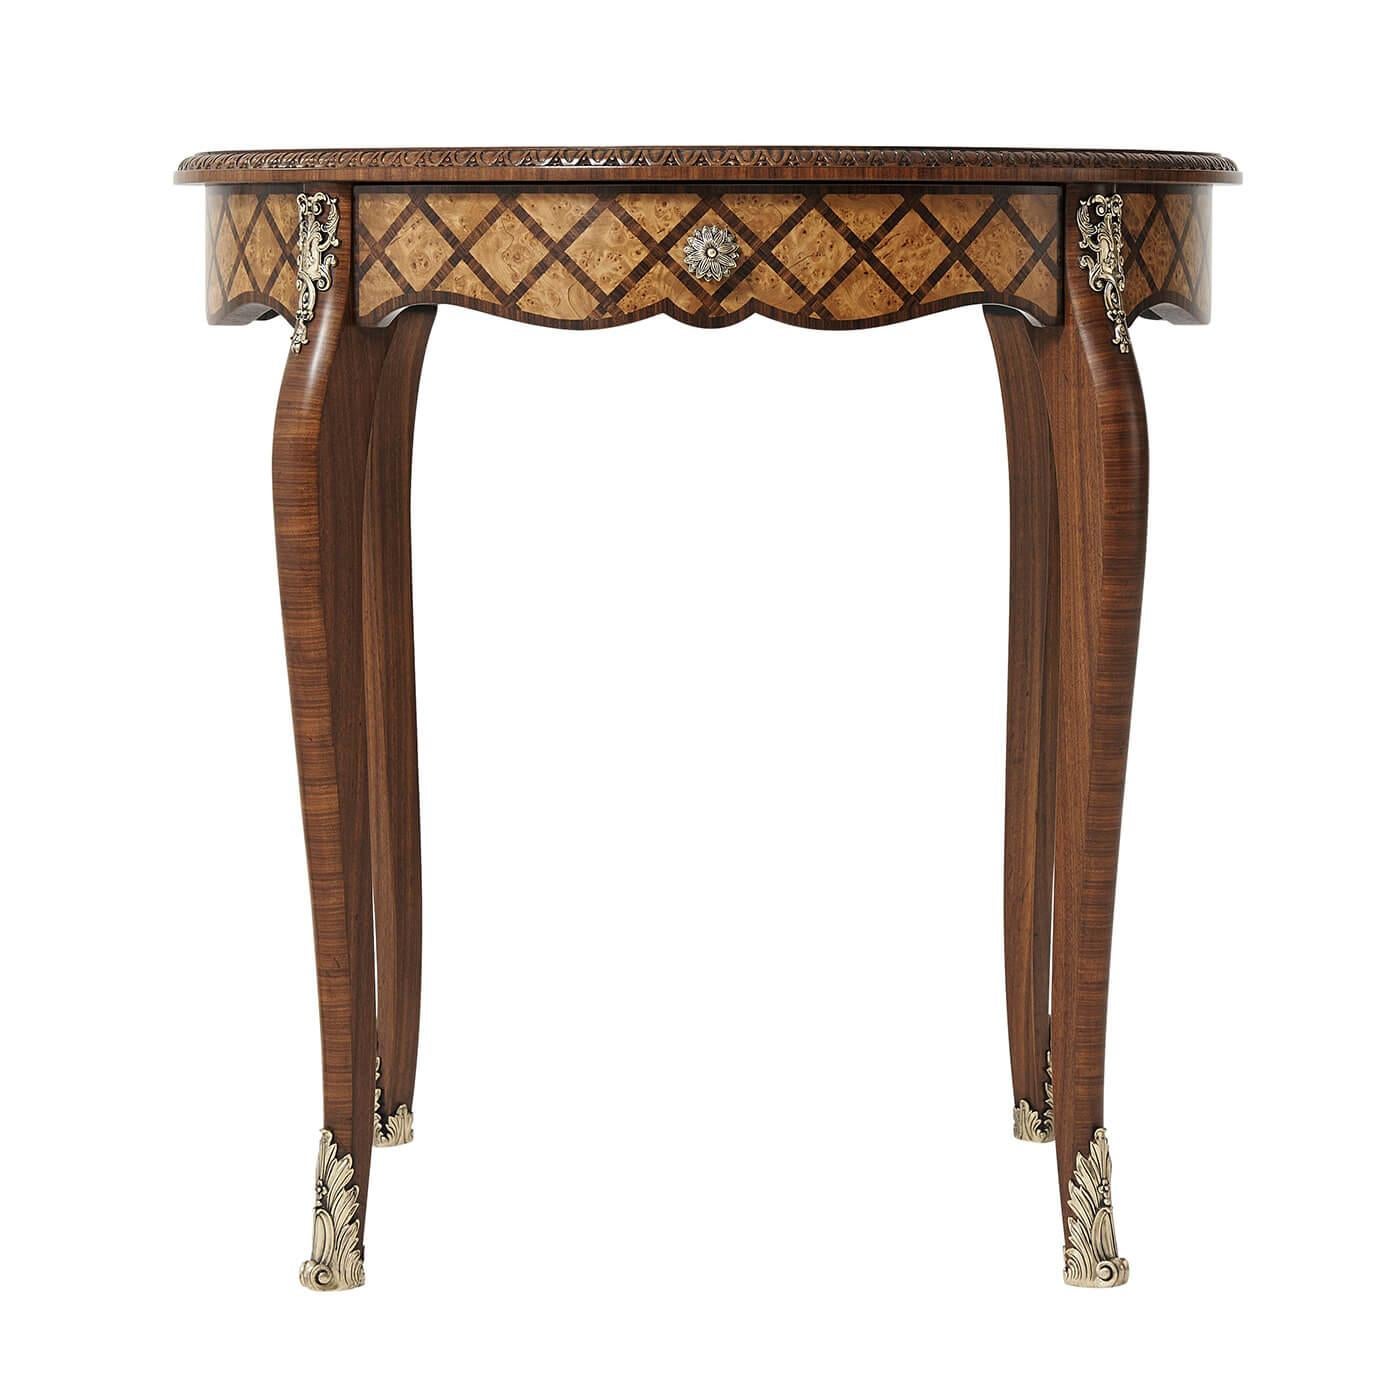 French round parquetry side table with yew burl and Morado parquetry, the circular egg and dart carved edge top above an undulating frieze and drawer with flowerhead cast brass handles, on curved front Morado veneered cabriole legs with cartouche